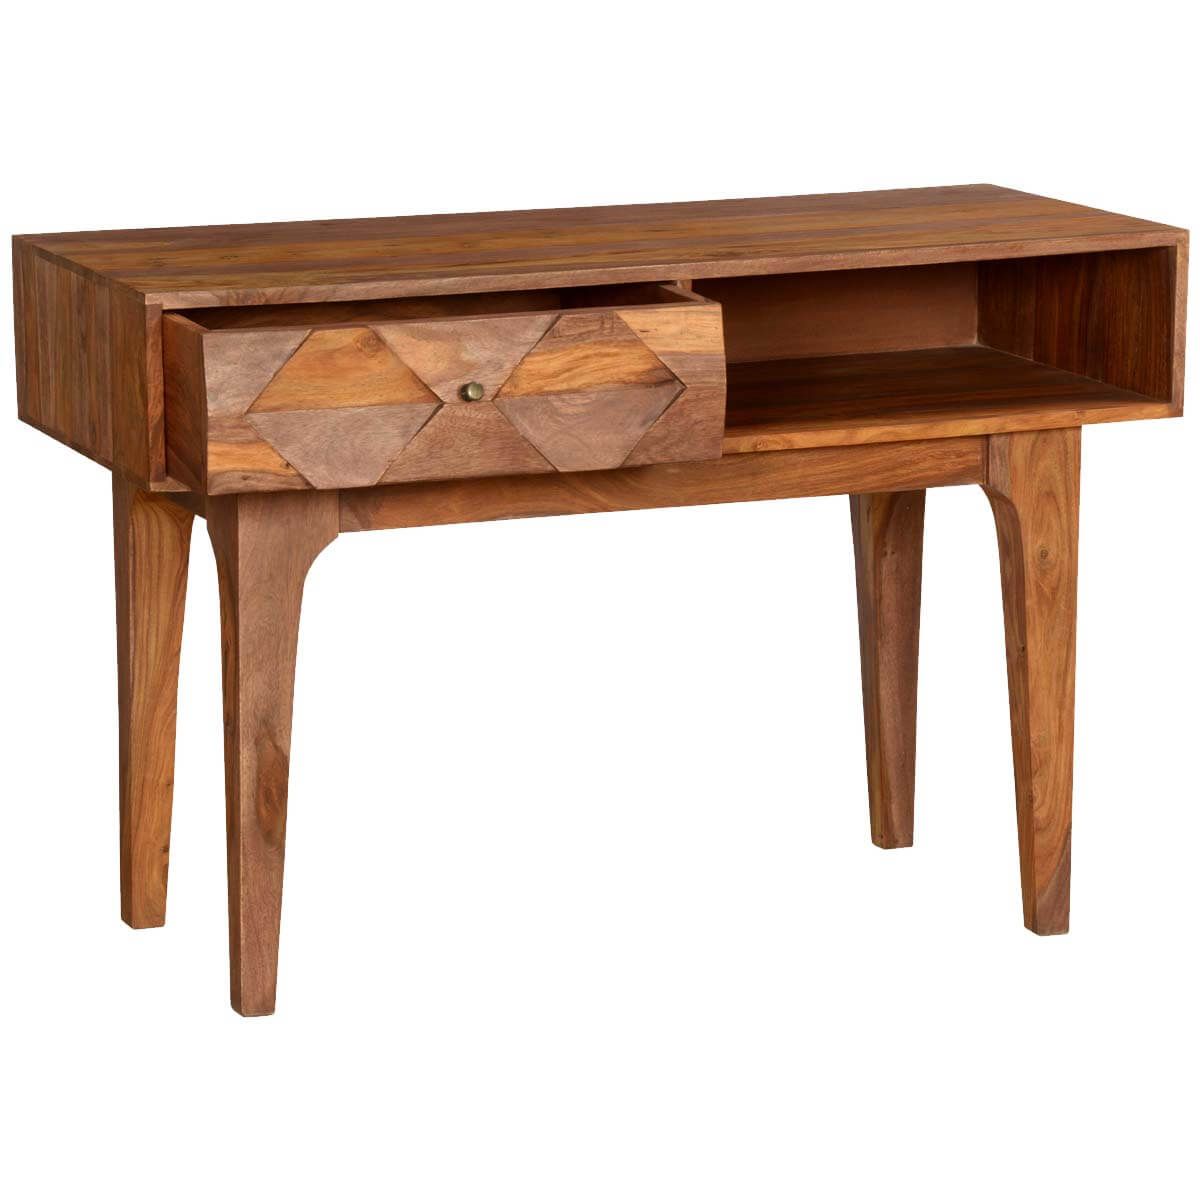 Hand Carved Diamonds Solid Wood Hall Writing Desk Intended For Hand Rubbed Wood Office Writing Desks (View 9 of 15)